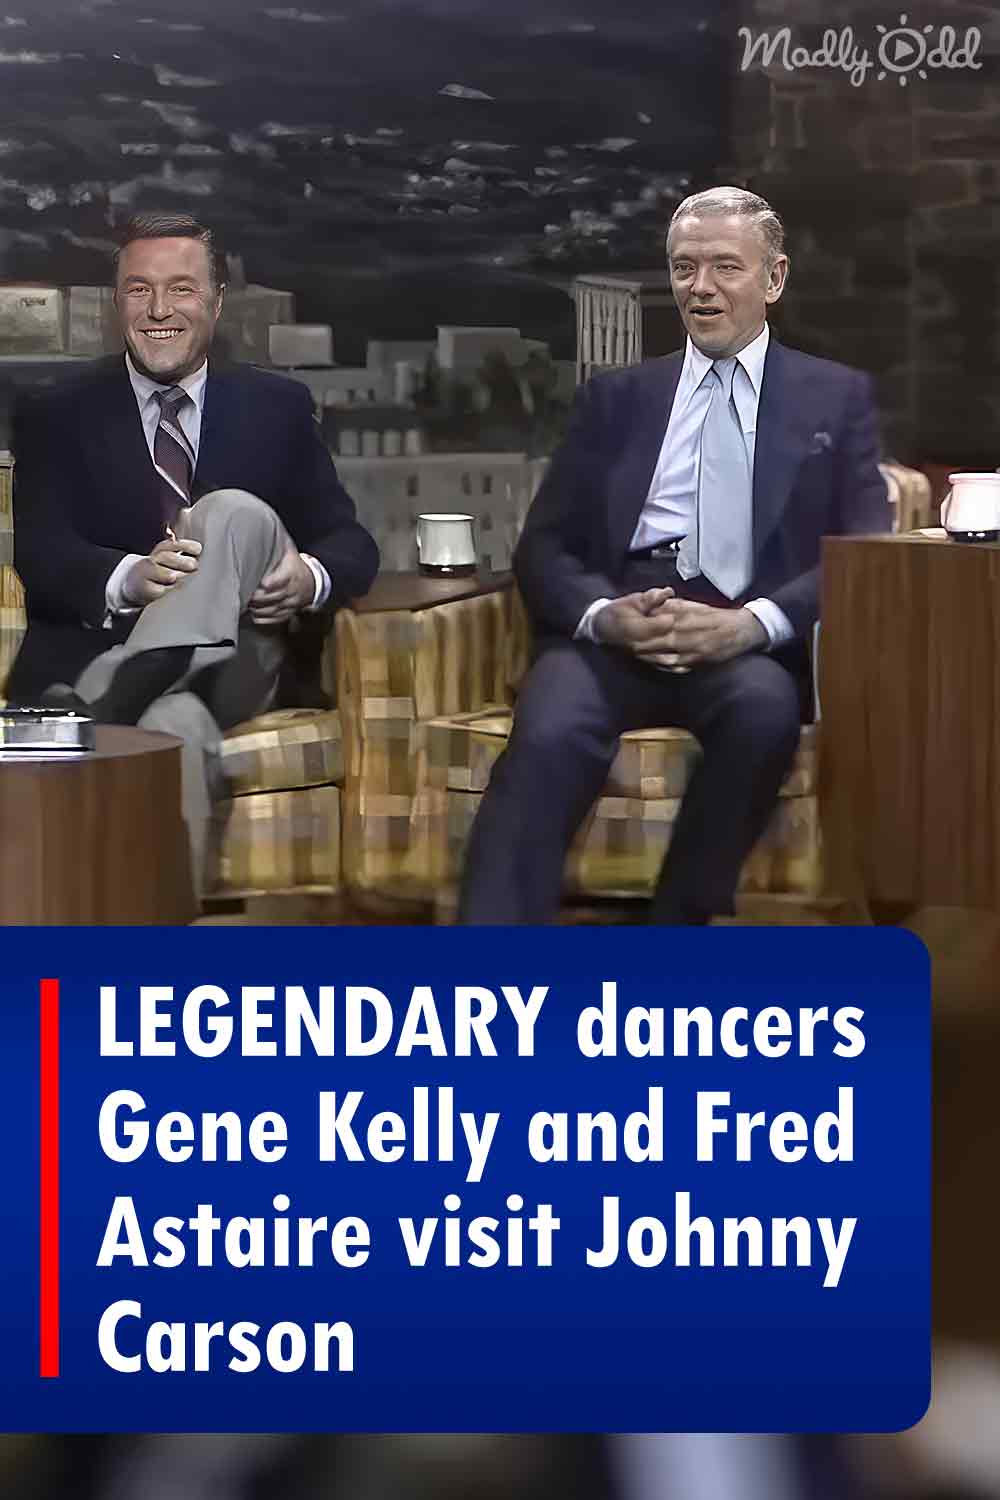 LEGENDARY dancers Gene Kelly and Fred Astaire visit Johnny Carson